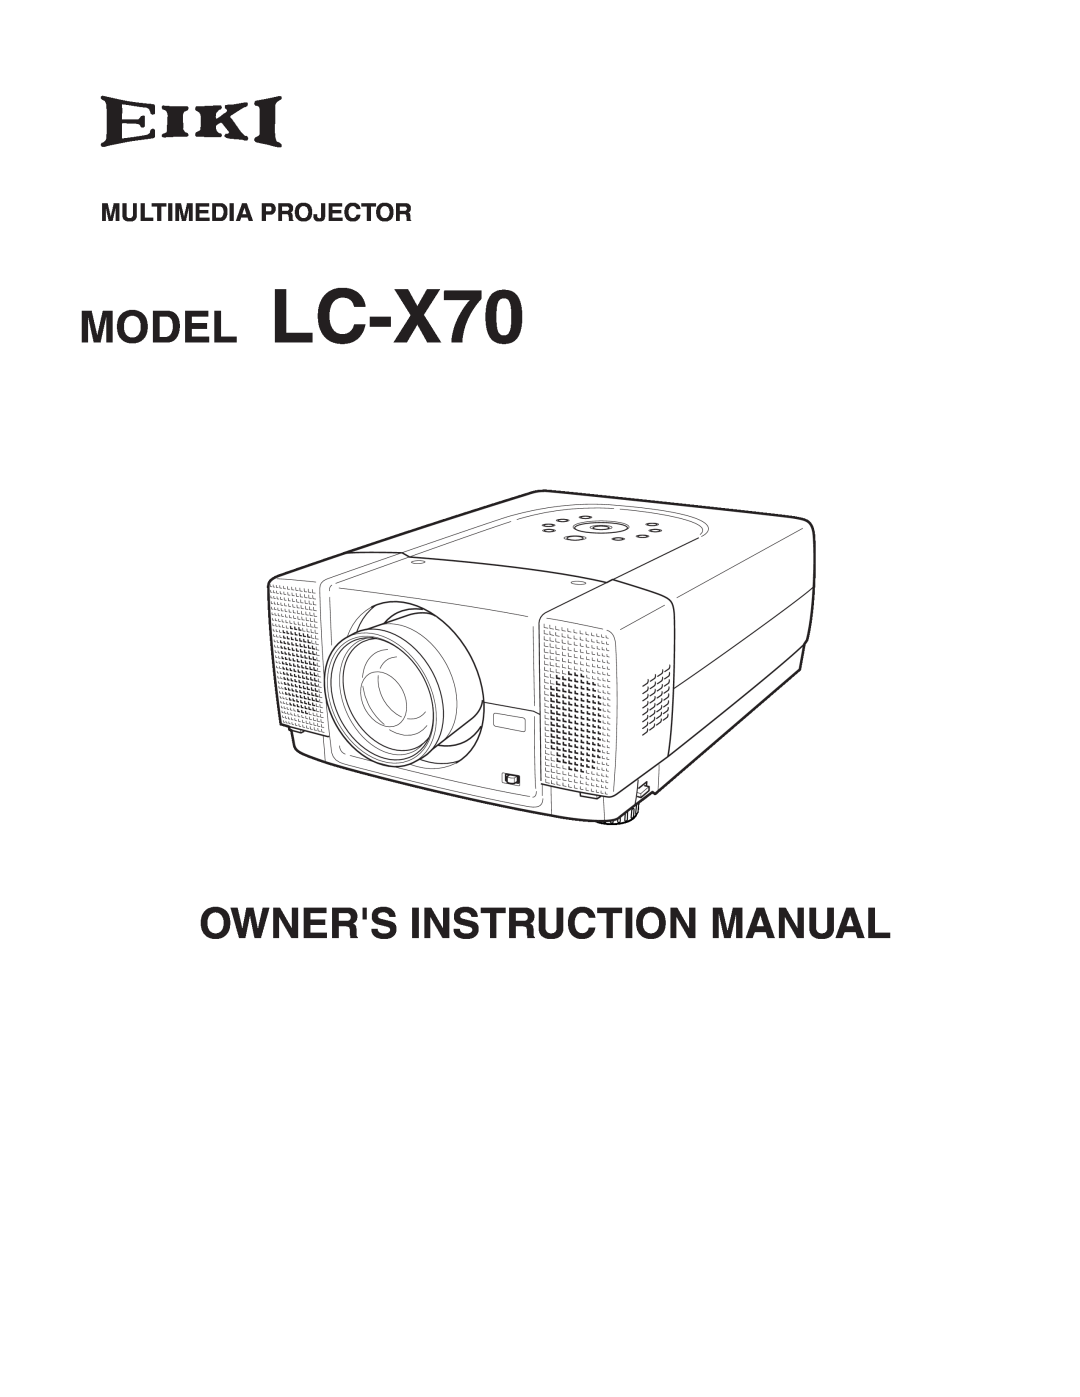 Eiki instruction manual Multimedia Projector, MODEL LC-X70, Owners Instruction Manual 